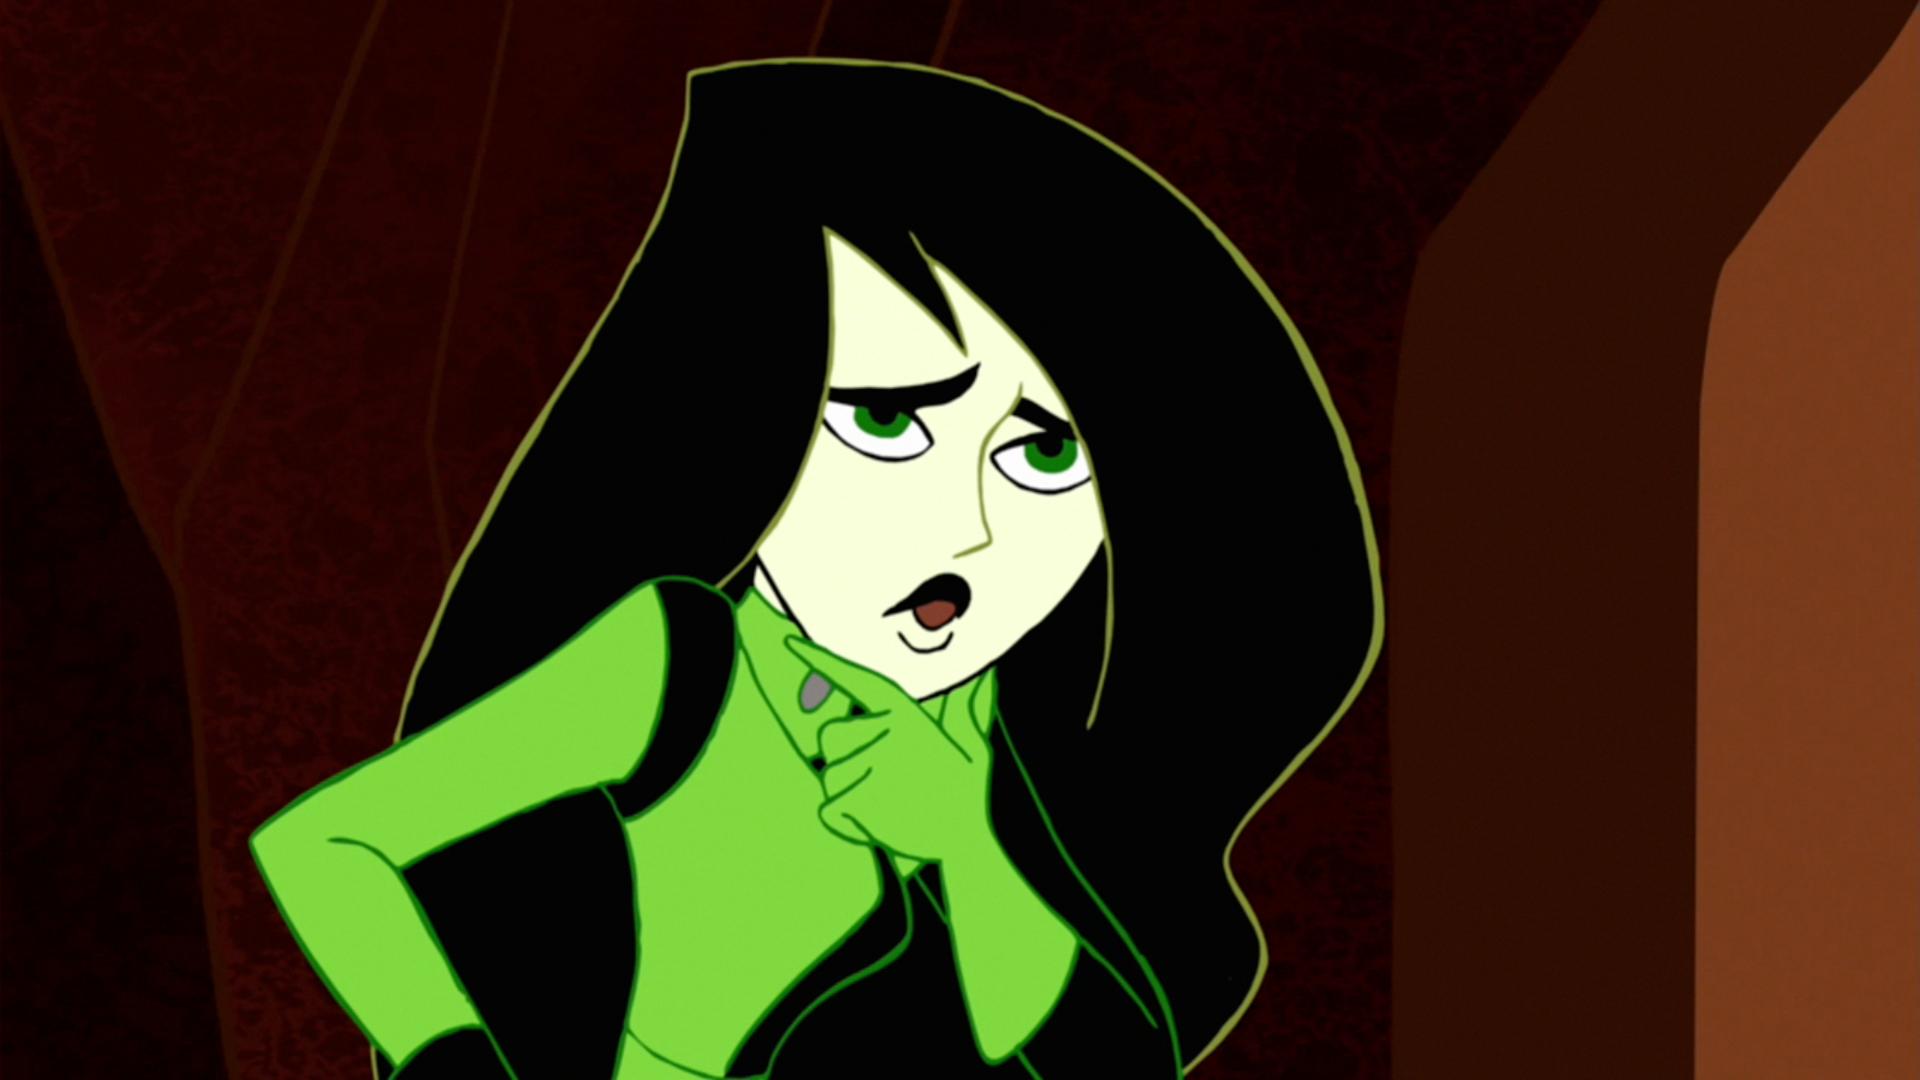 The Mentor of Our Discontent Screen Captures .:::. Kim Possible Fan World